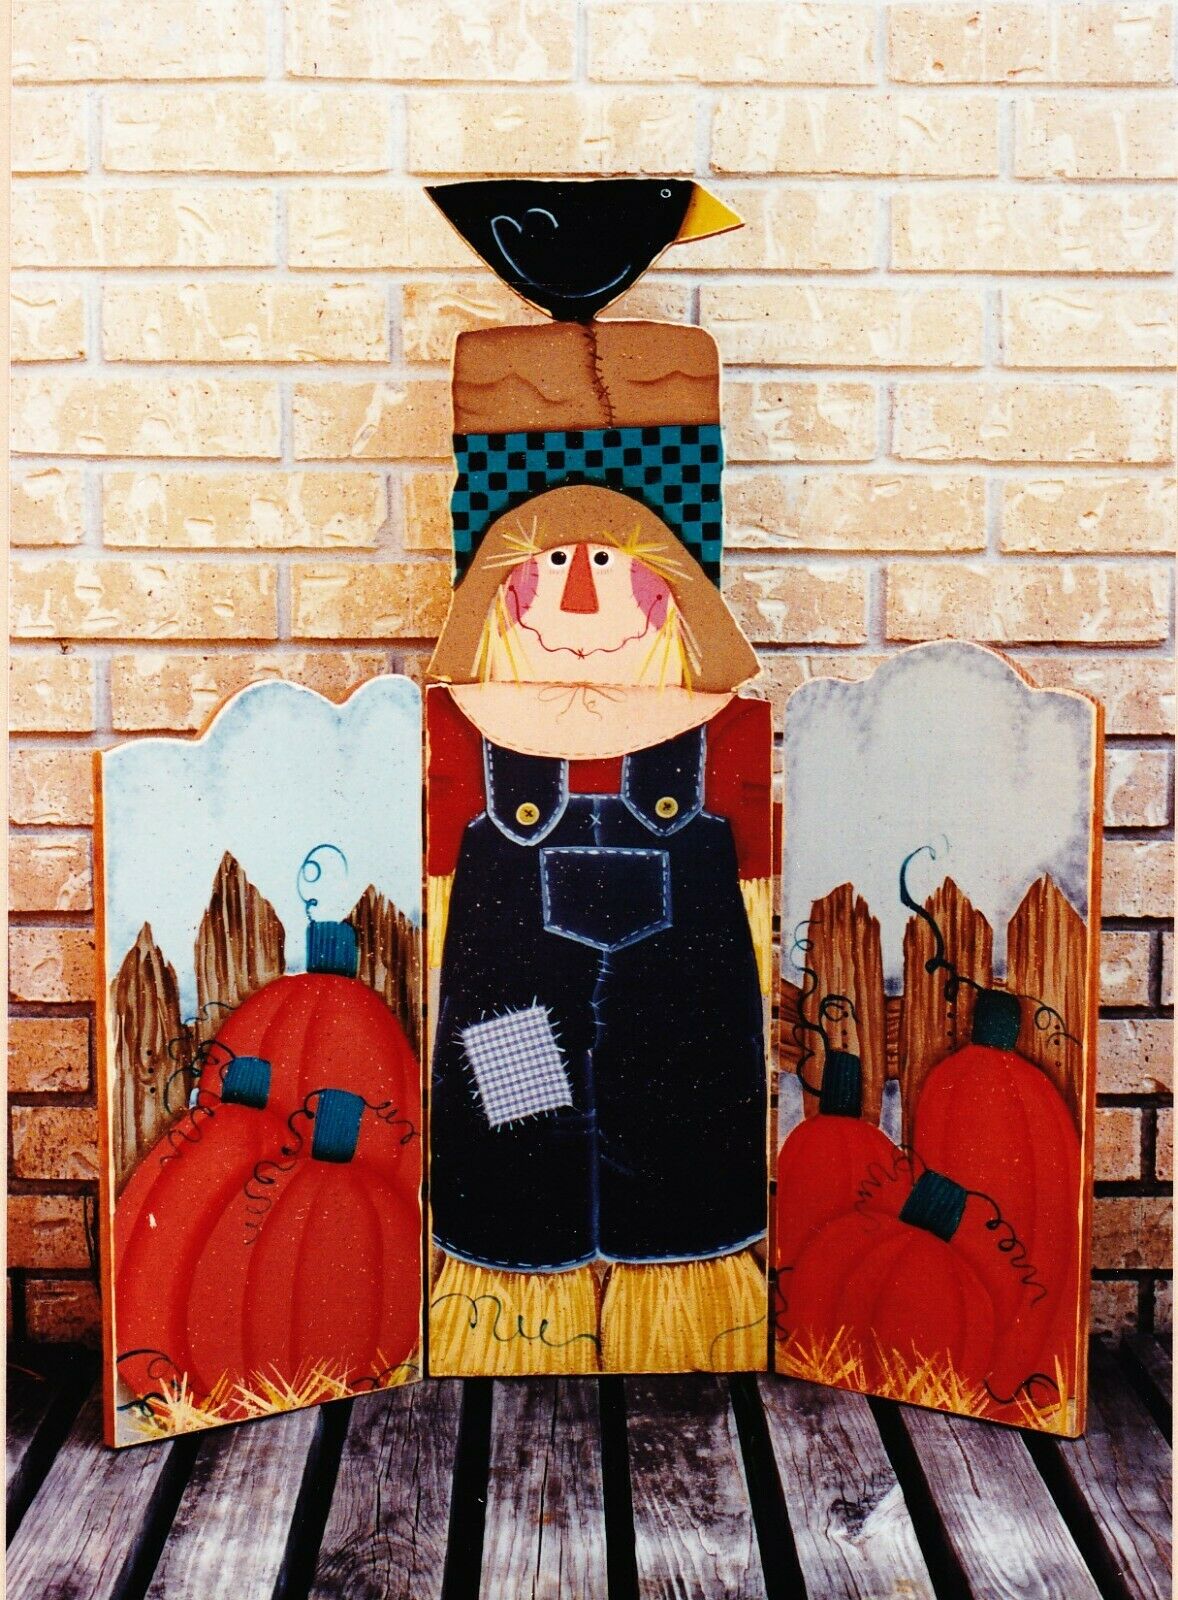 Mosey 'n Me "felix & Clyde Standin' In The Pumpkins" Tole Painting Pattern 1995